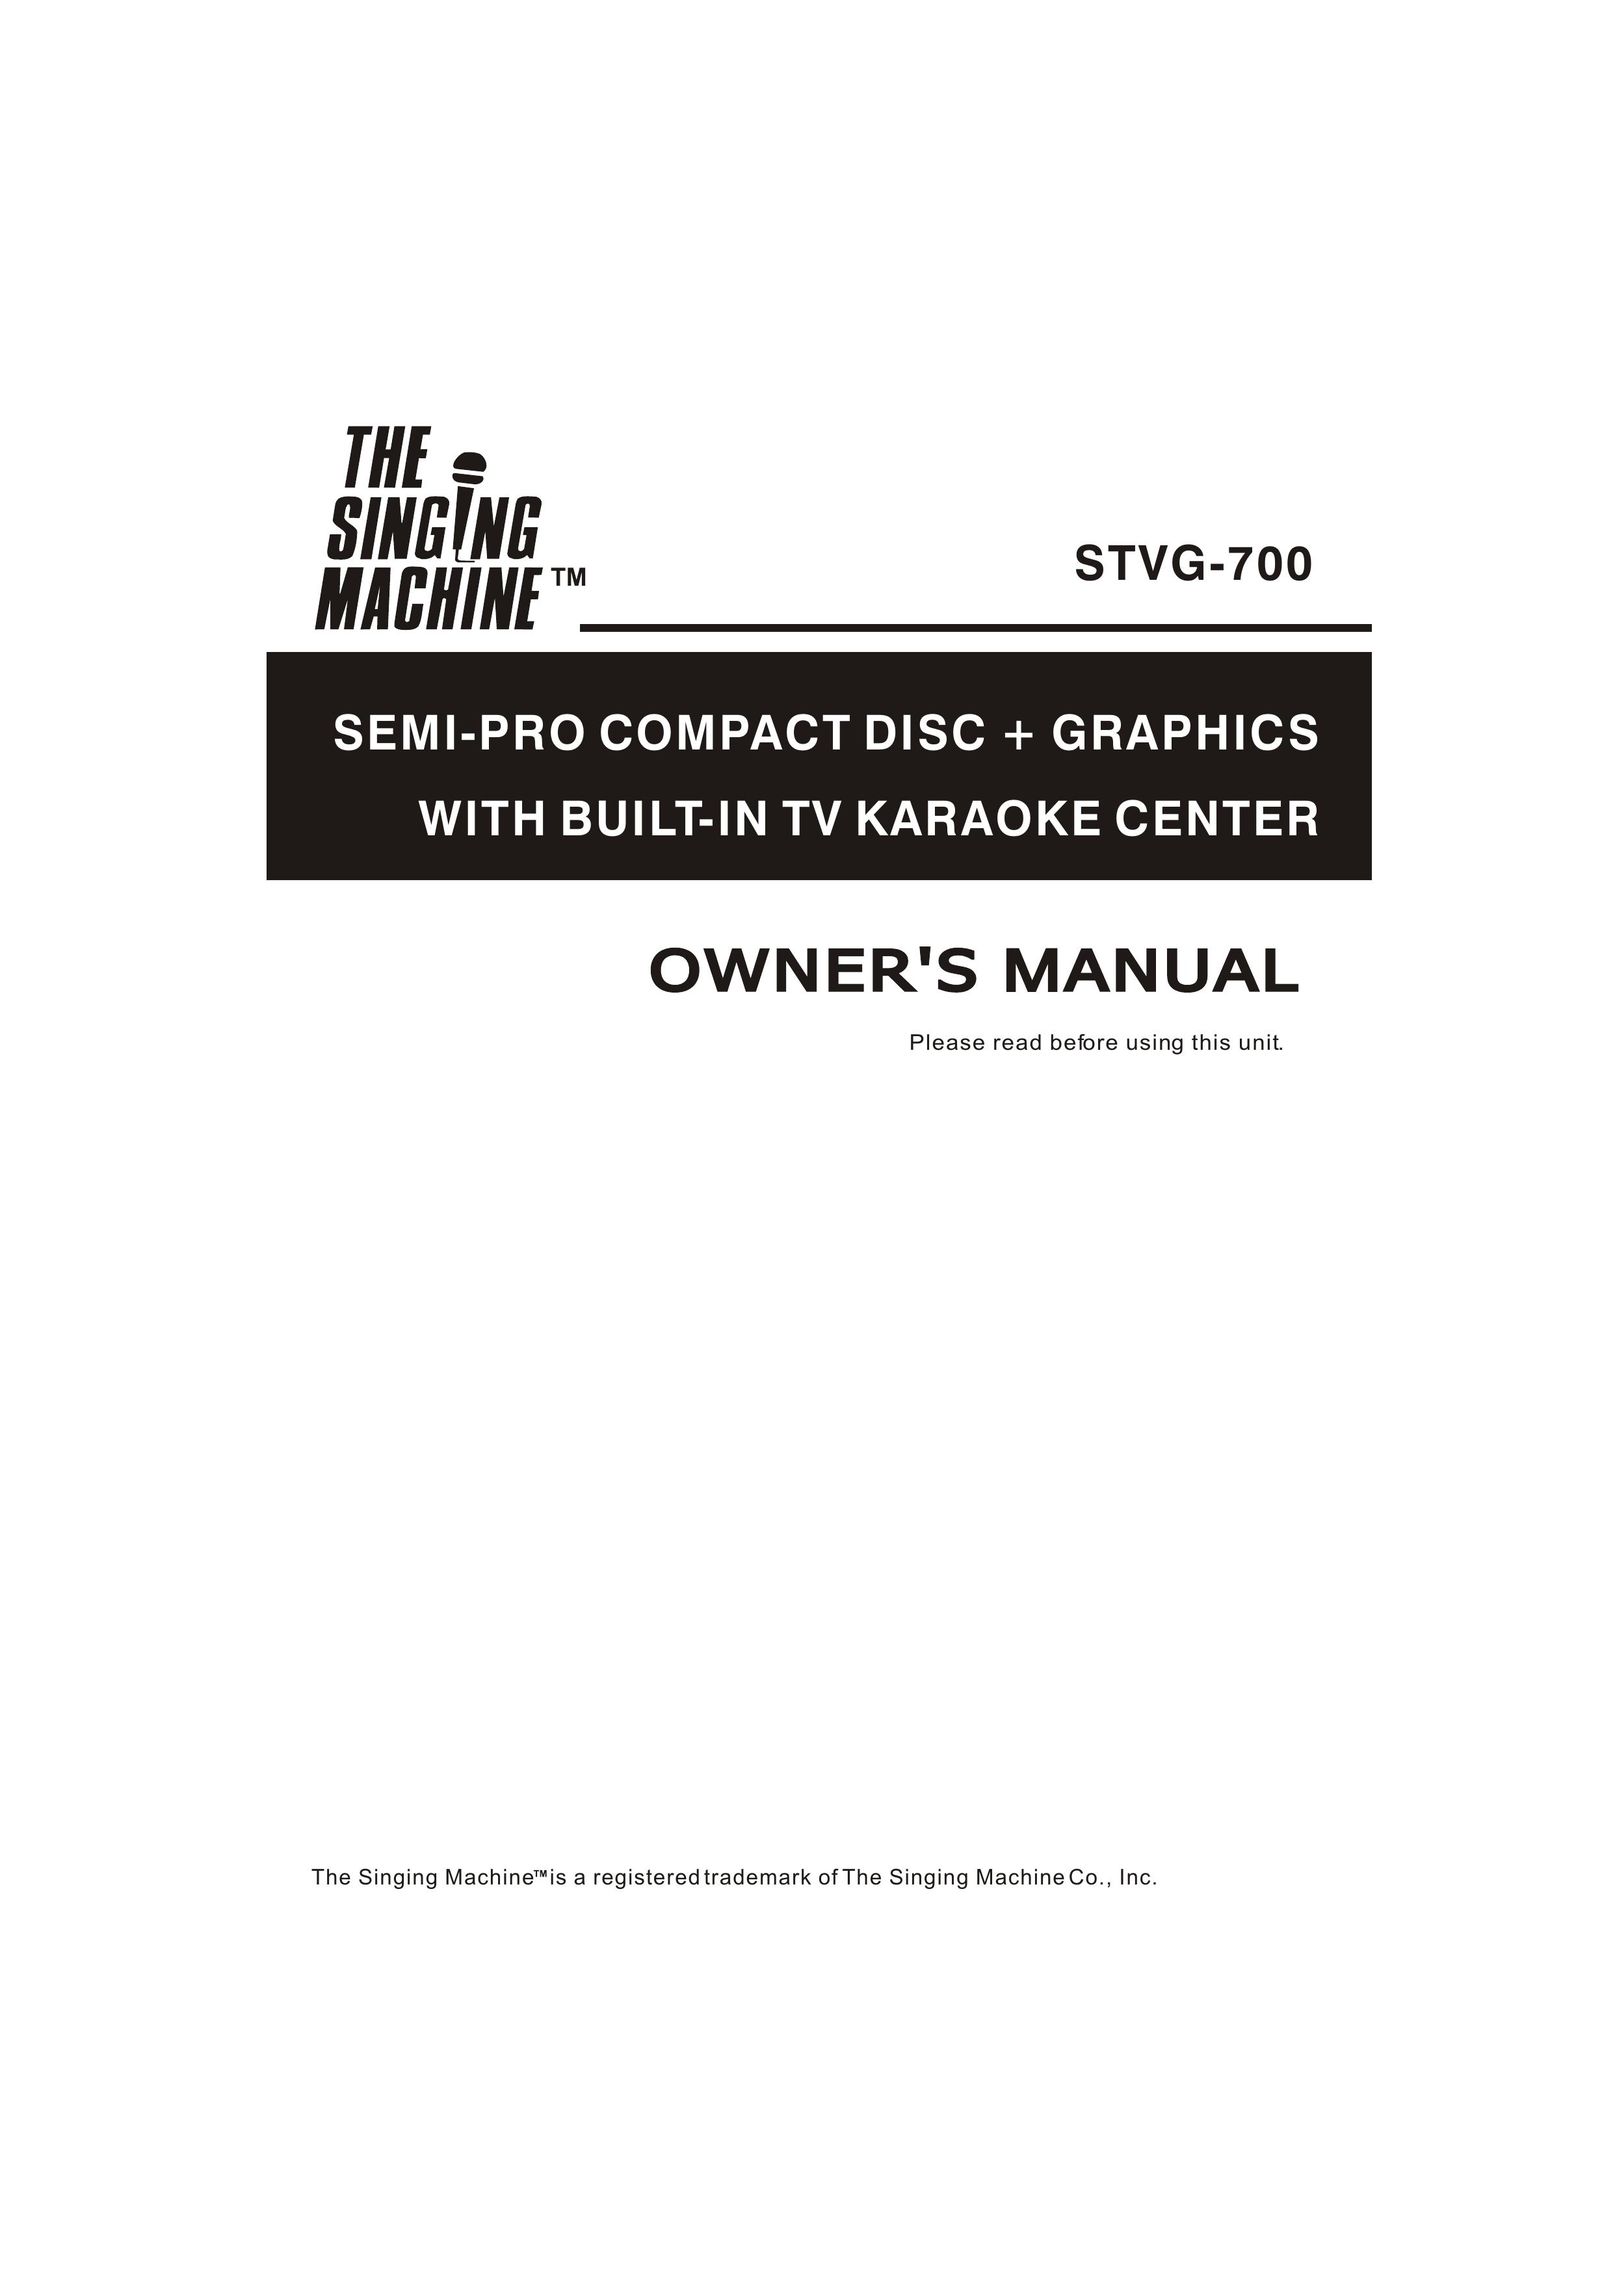 The Singing Machine STVG-700 Home Theater System User Manual